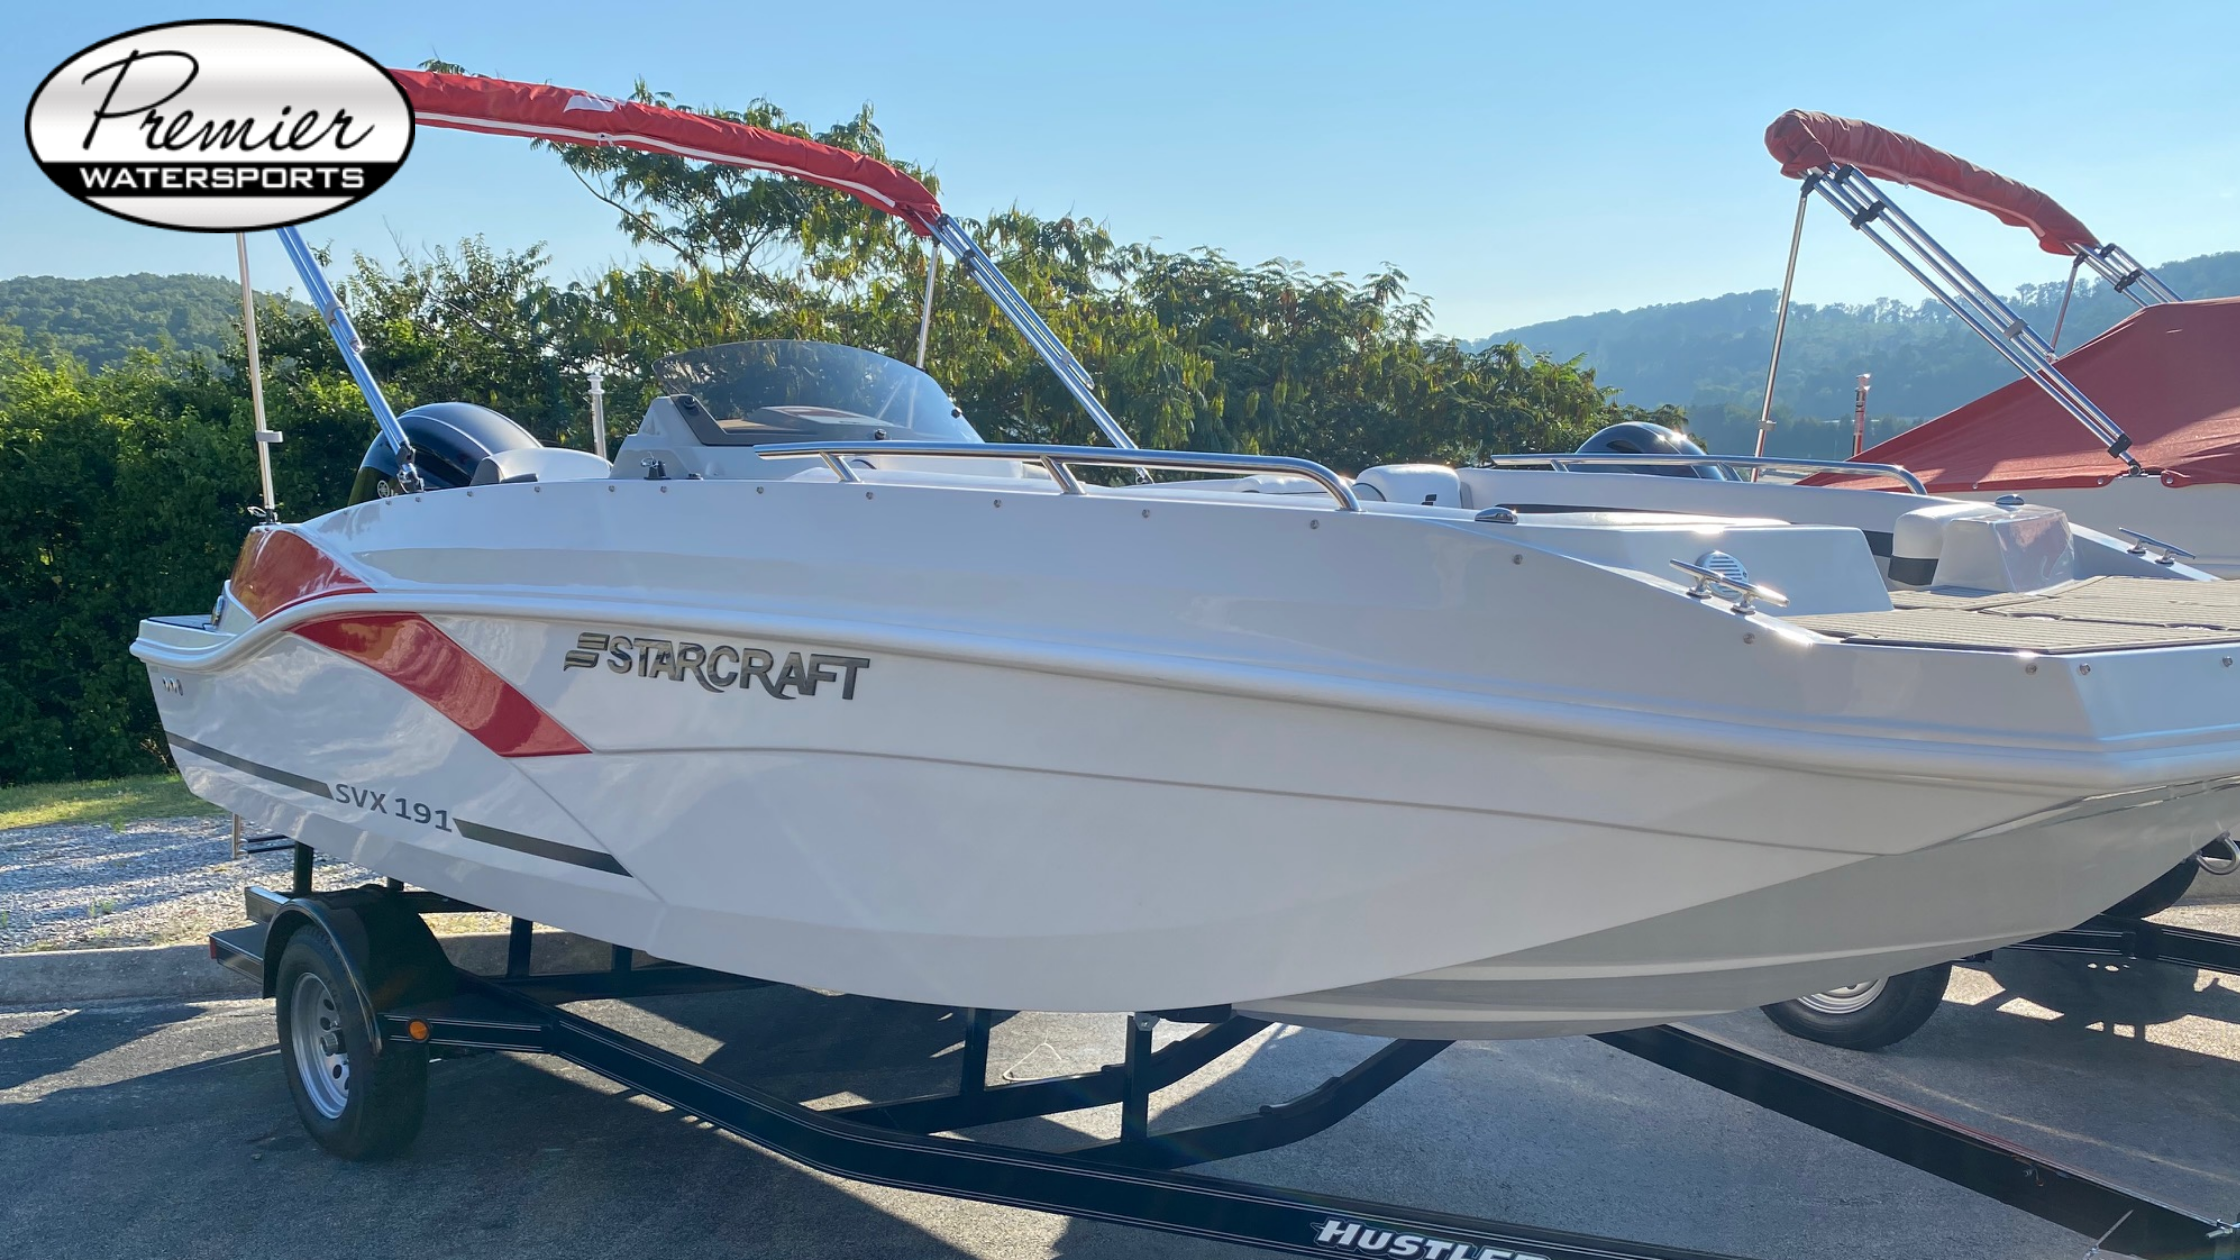 What are Bowrider Boats?